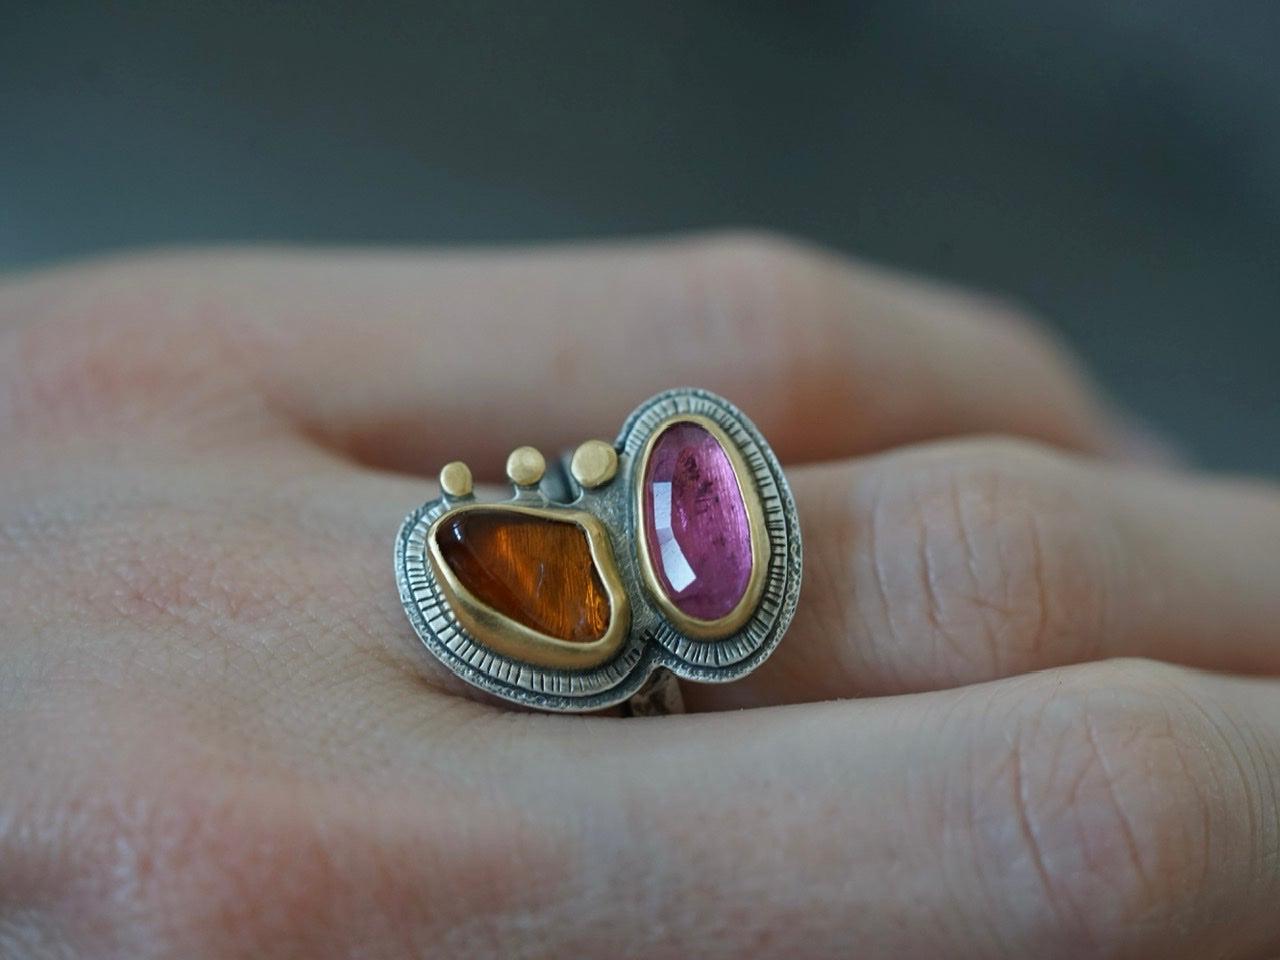 Tourmaline ring with gold accents, size 7